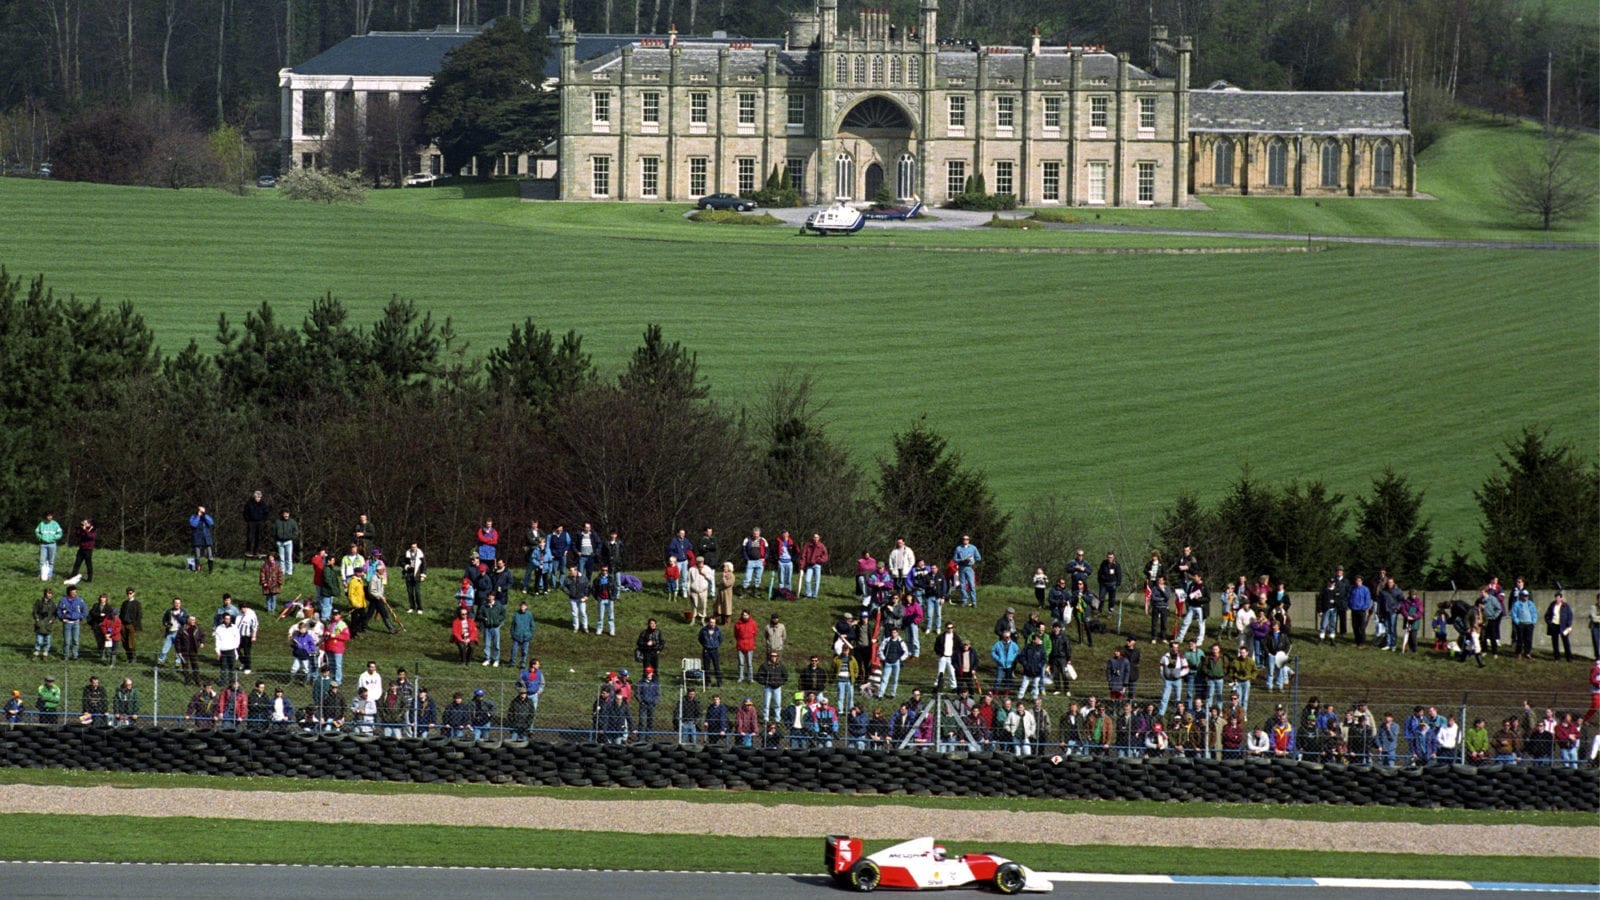 Donington Hall during the 1993 European Grand Prix weekend